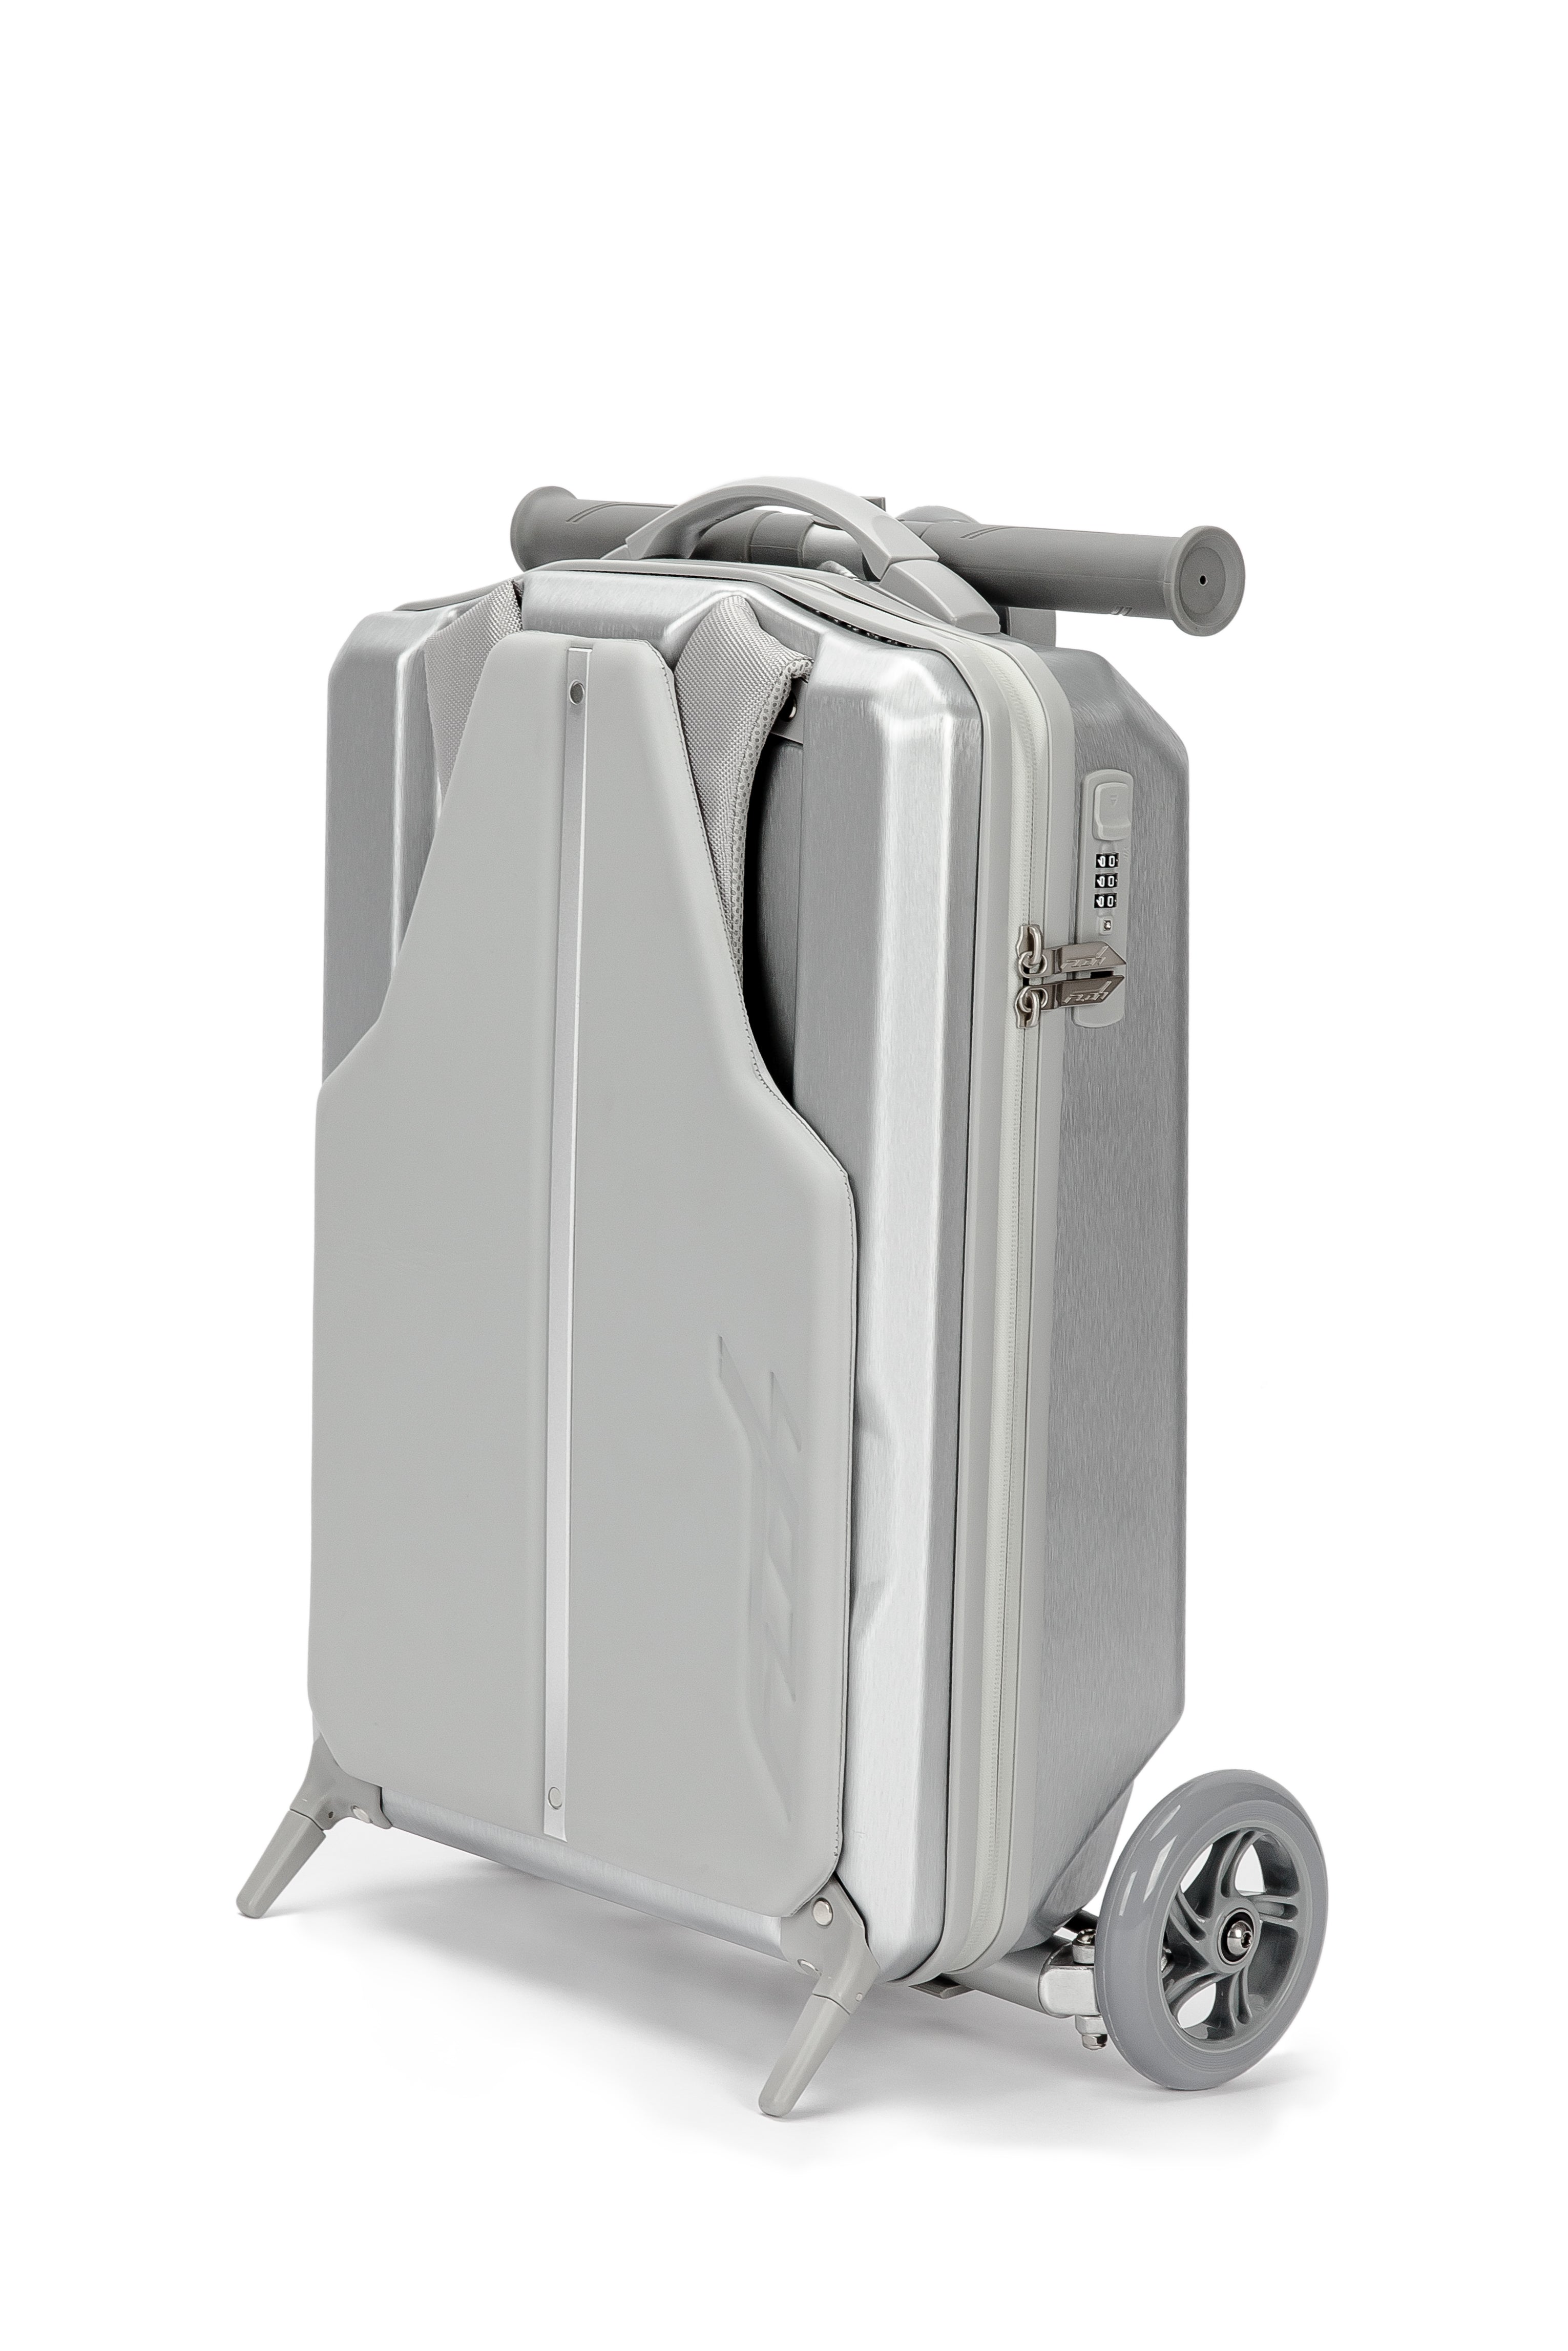 SILVER SCOOTER WITH SUITCASE SHAPE 4